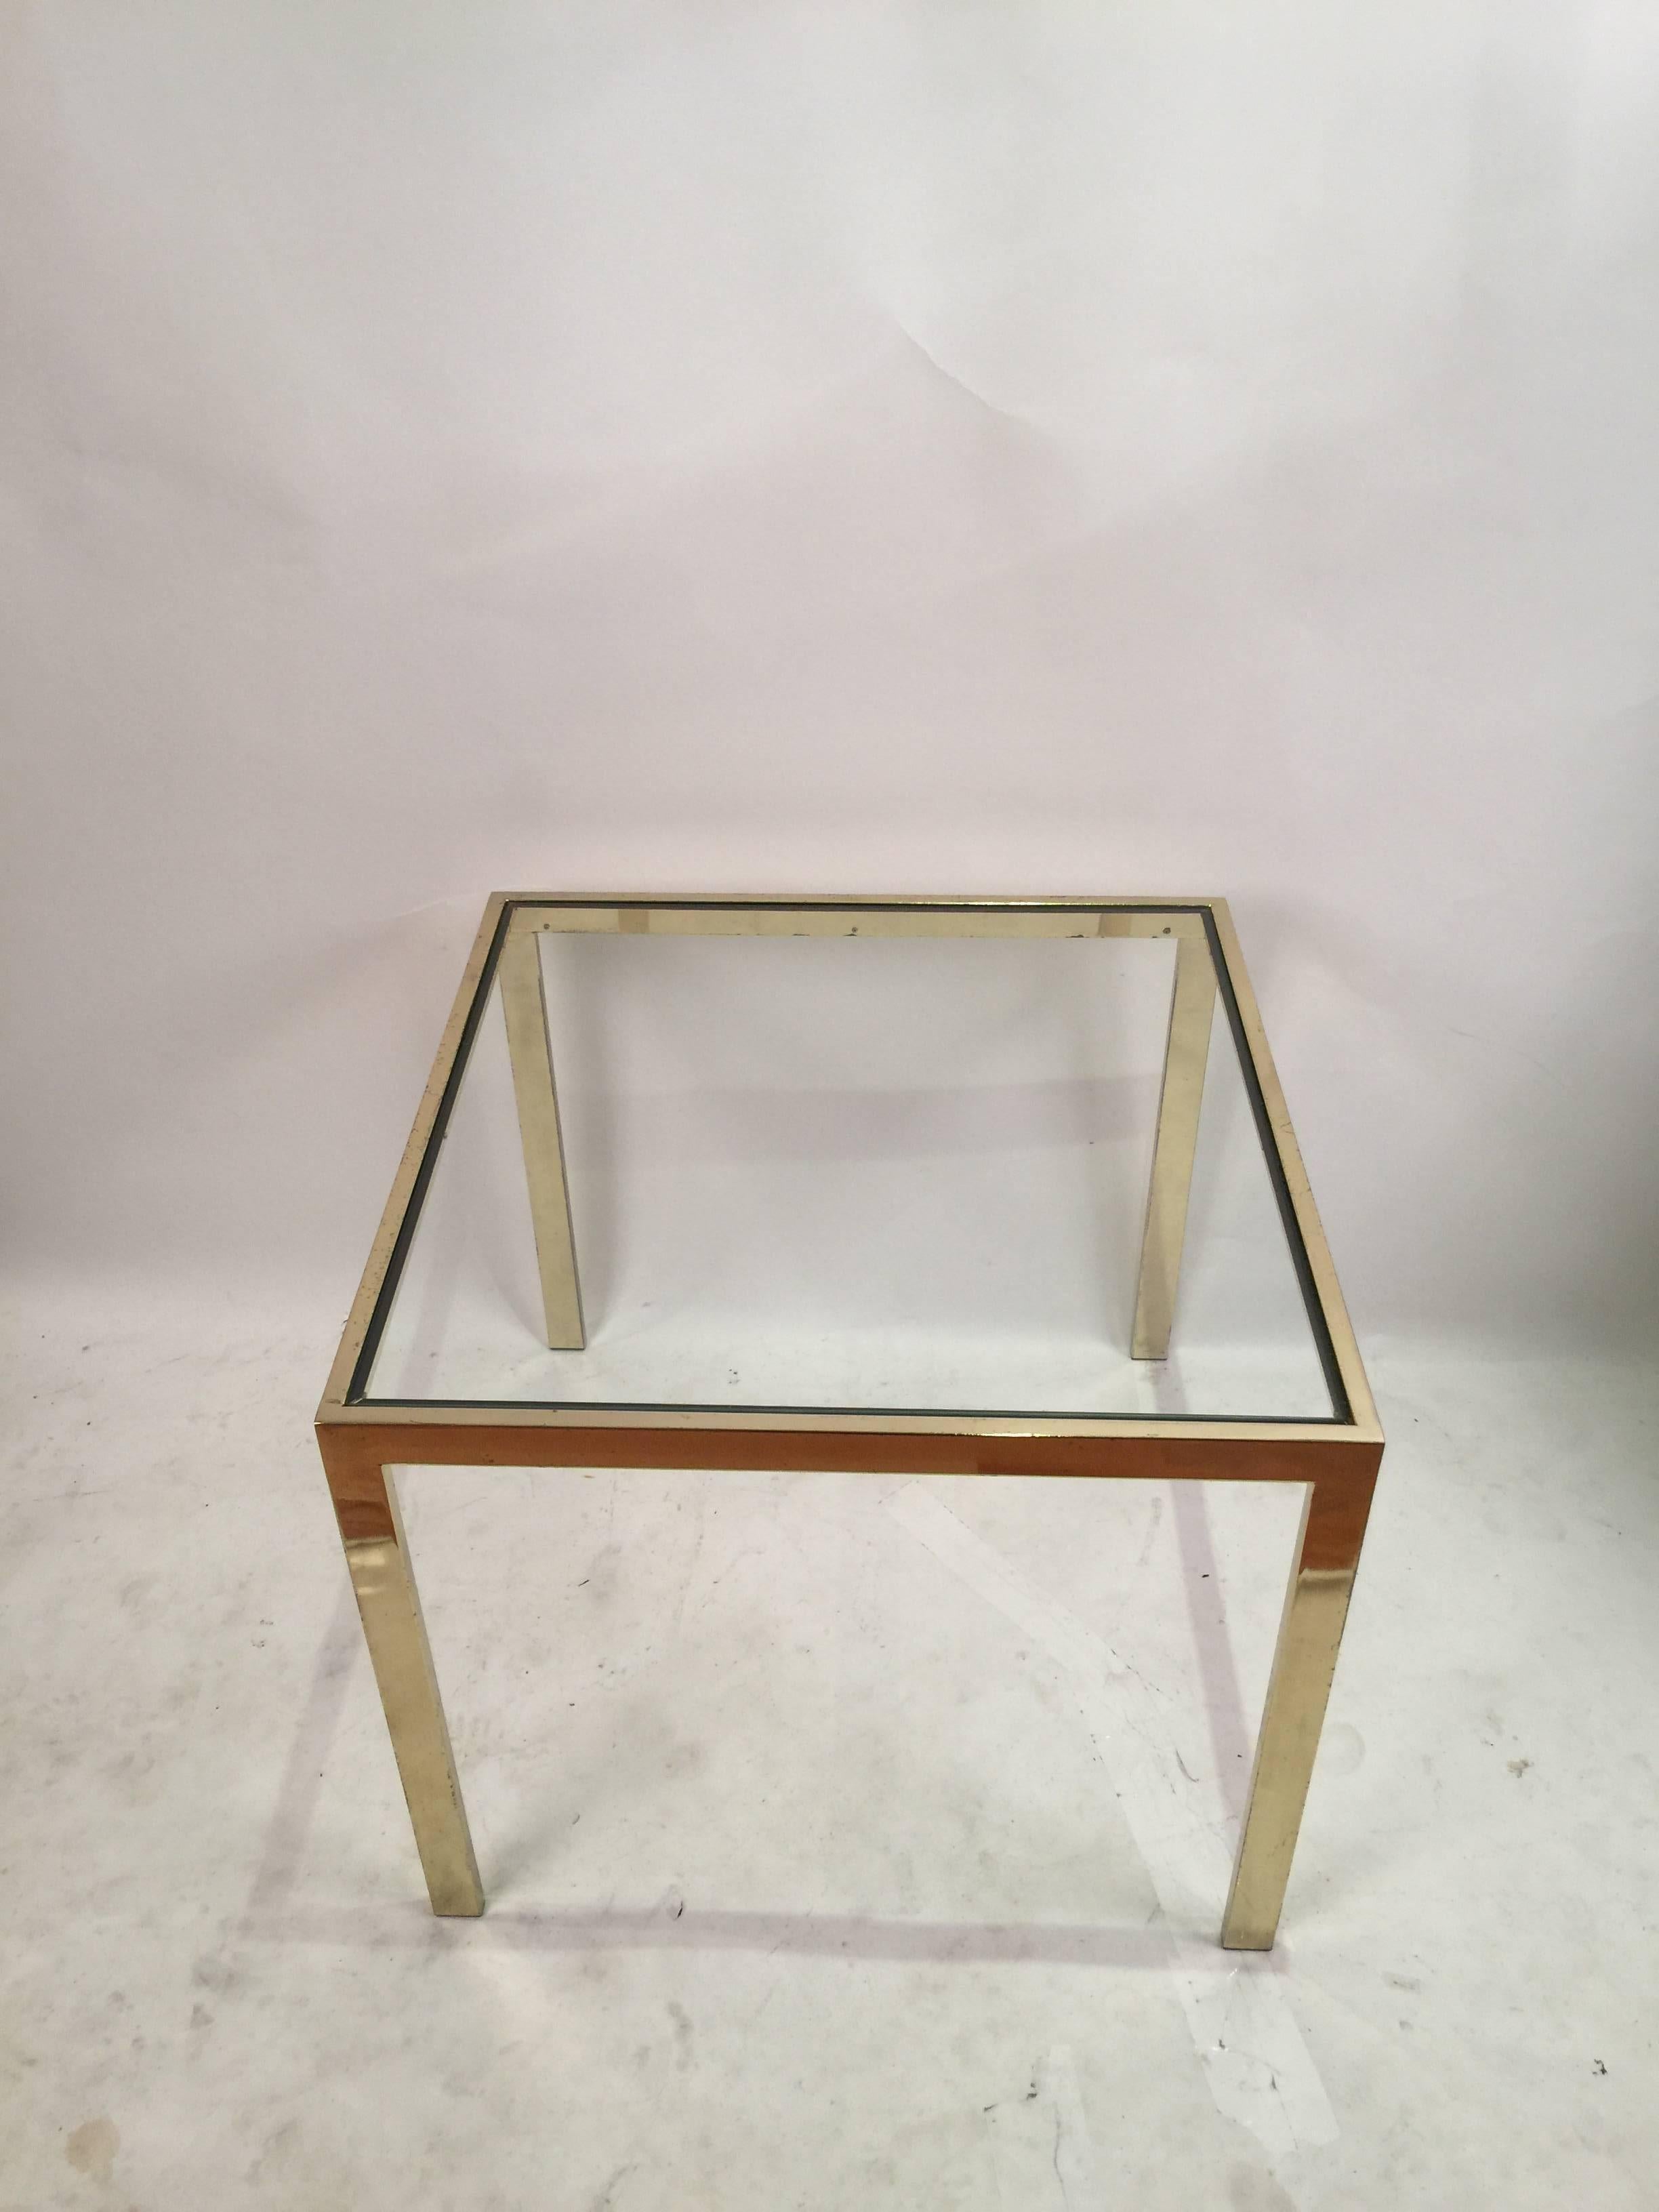 Classic brass and glass square table. This 'Flat Bar' design was produced by the Design Institute of America in 1986.
  